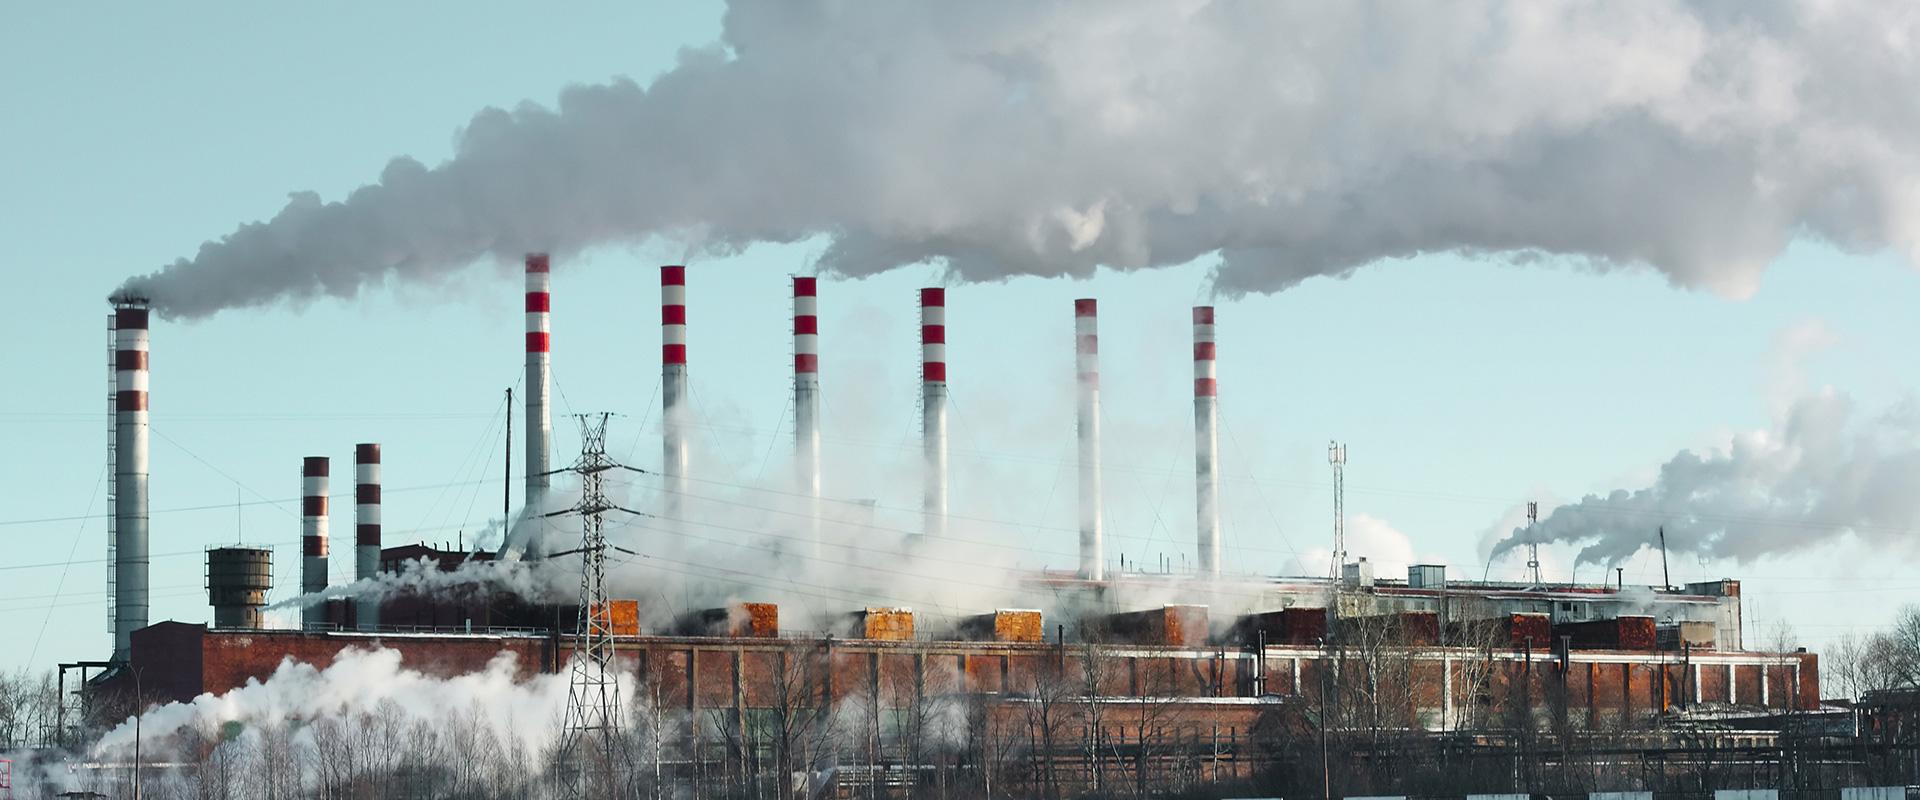 Chimneys of a coal-fired power plant, Georgia